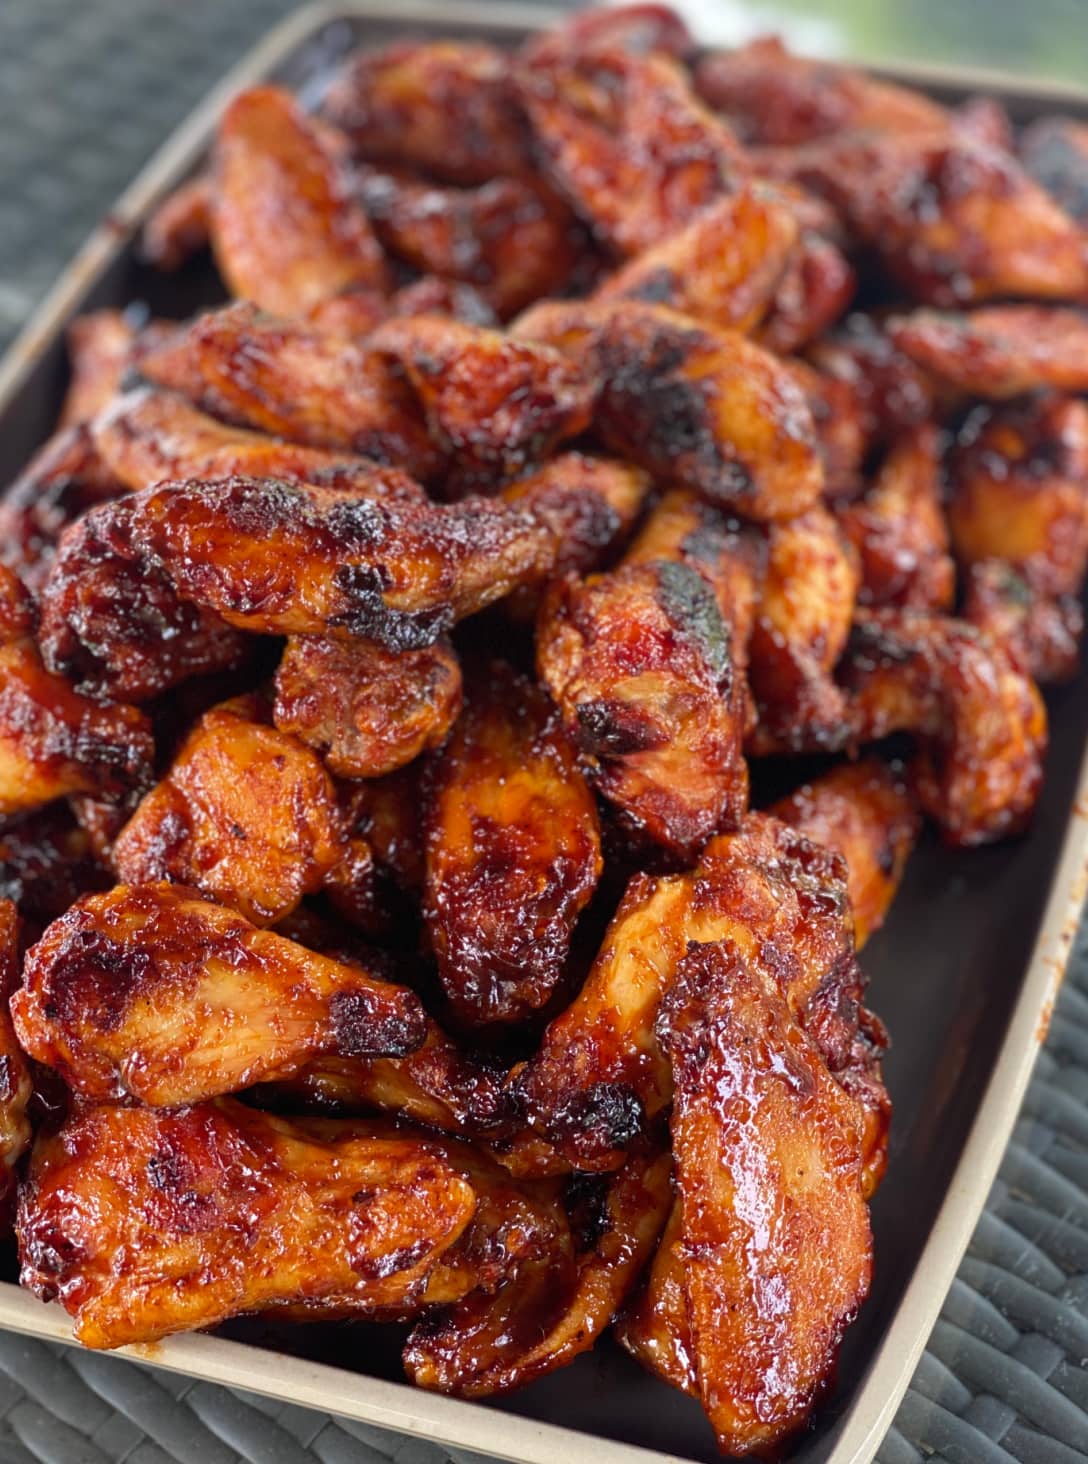 Smoked Chicken Wings on Platter